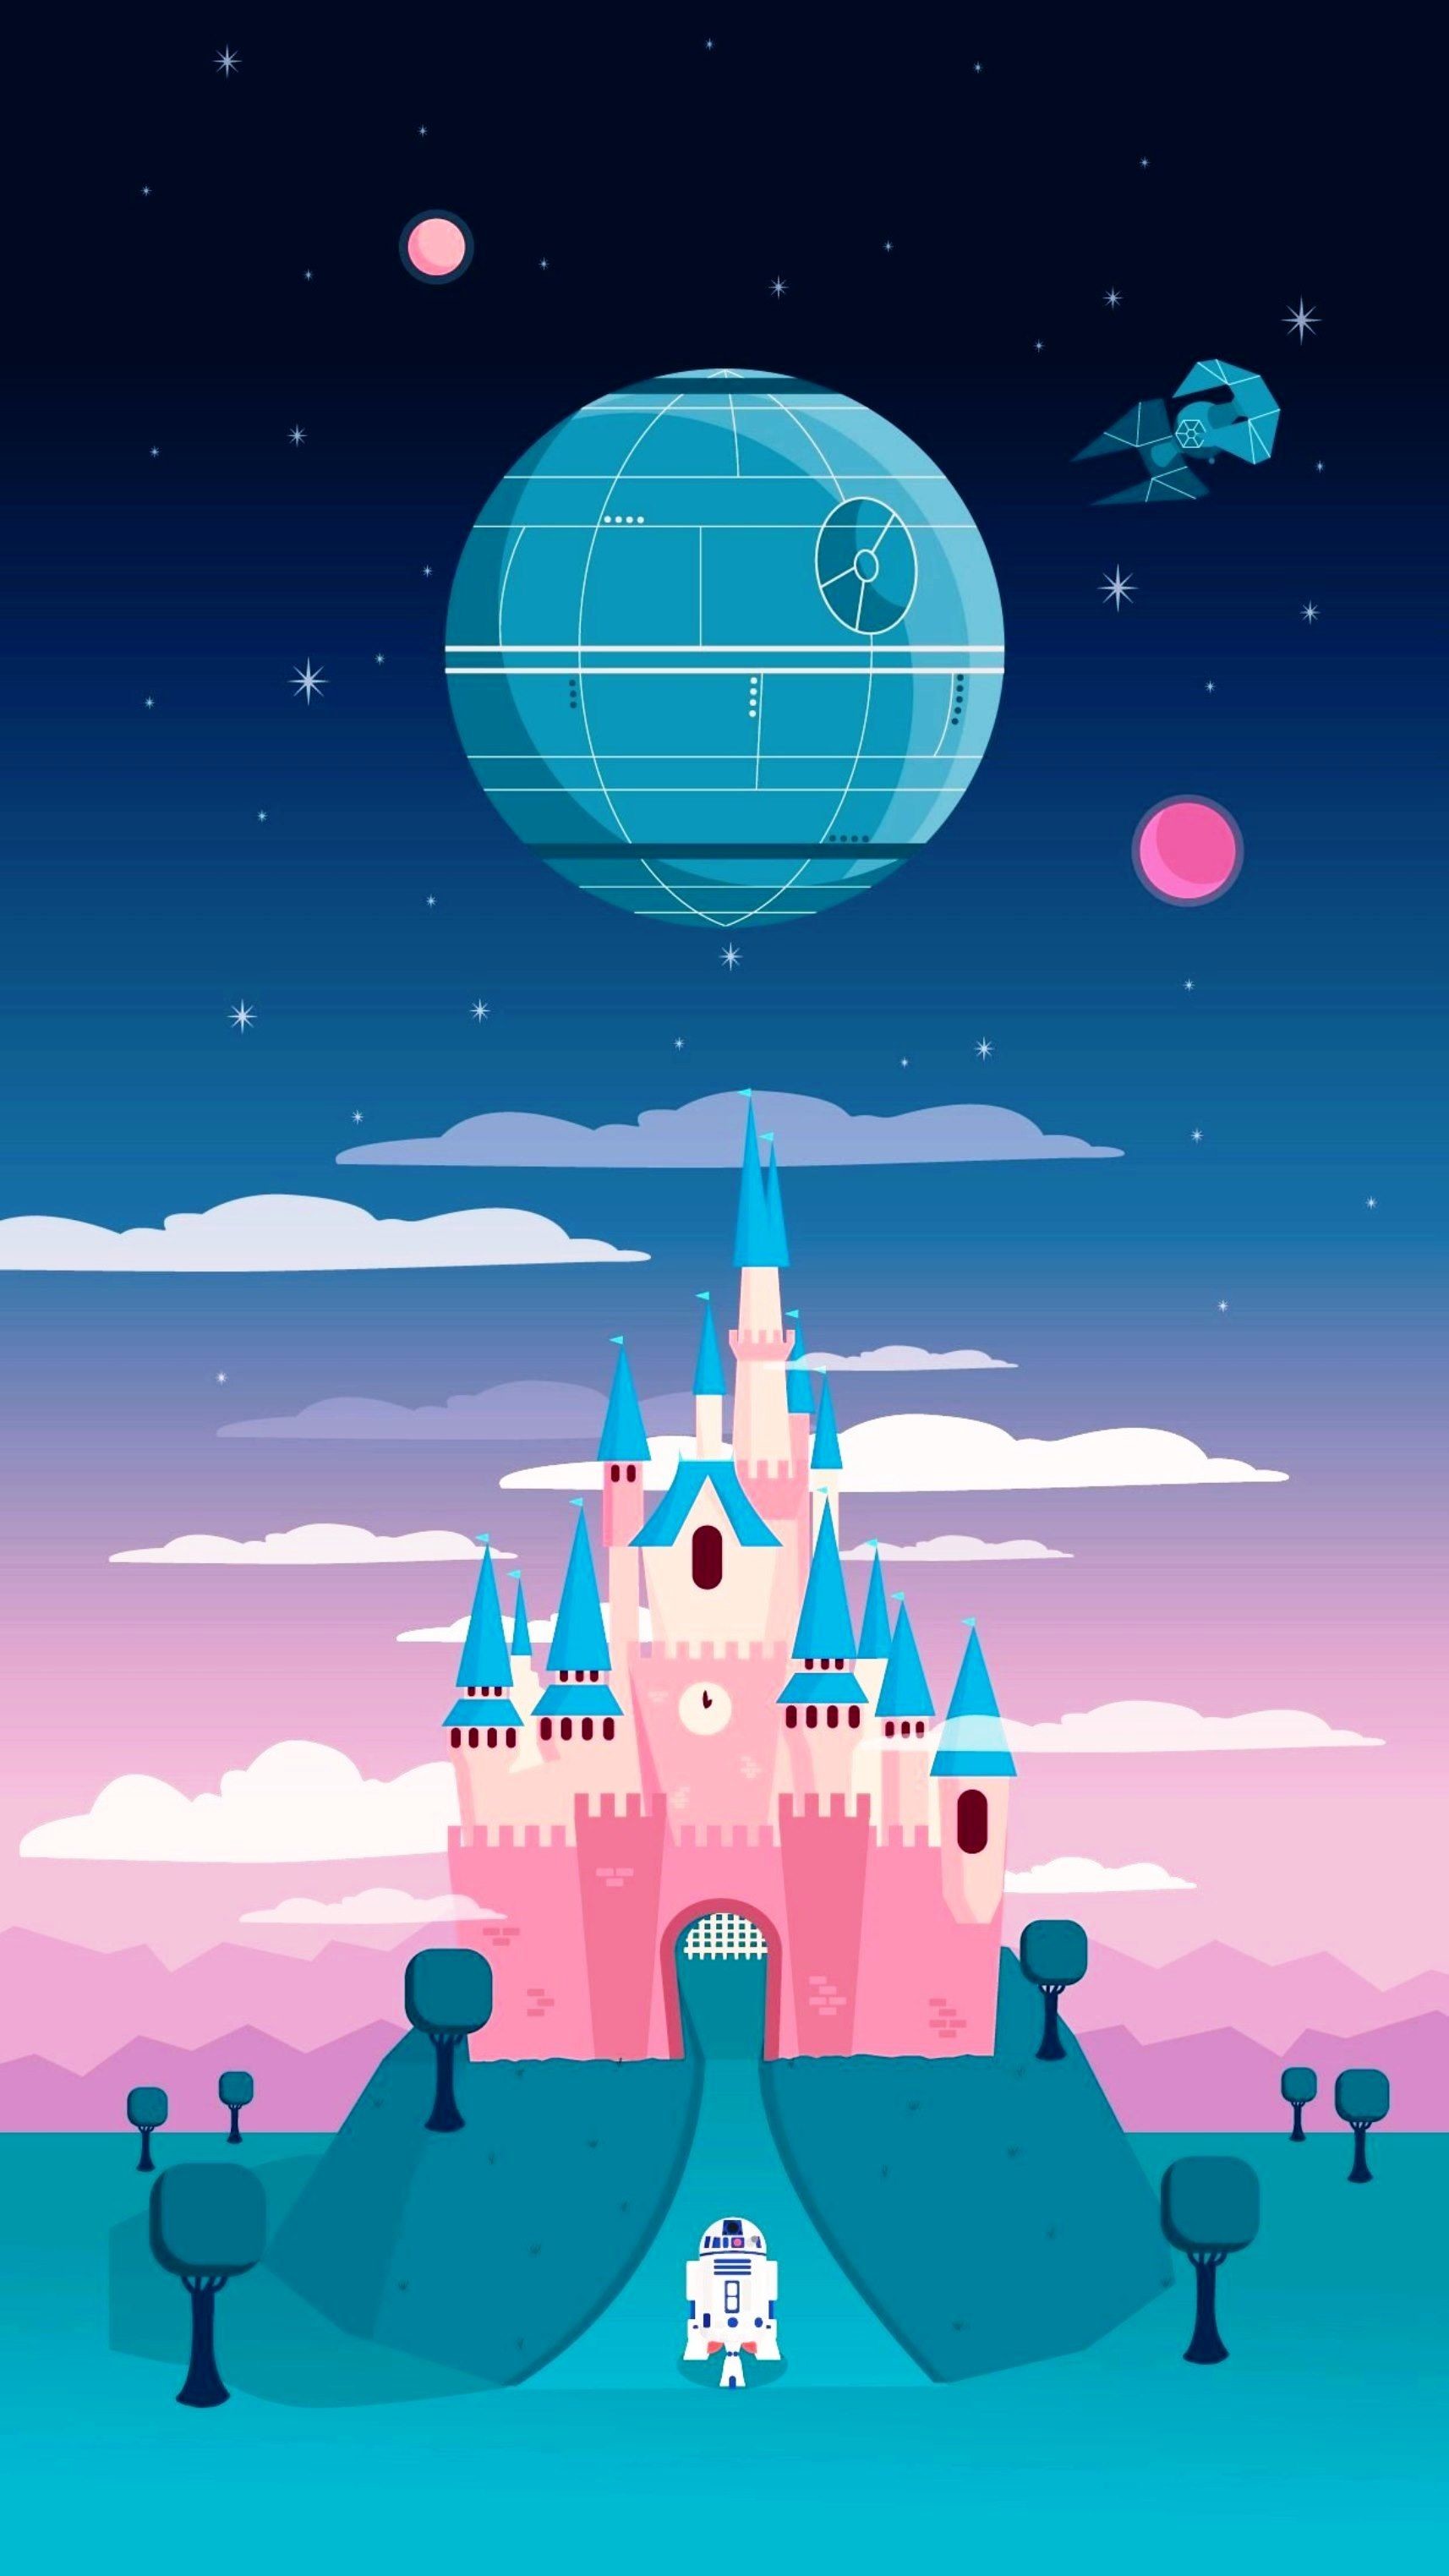 Cute Mickey Mouse iPhone Wallpaper (71+ images)